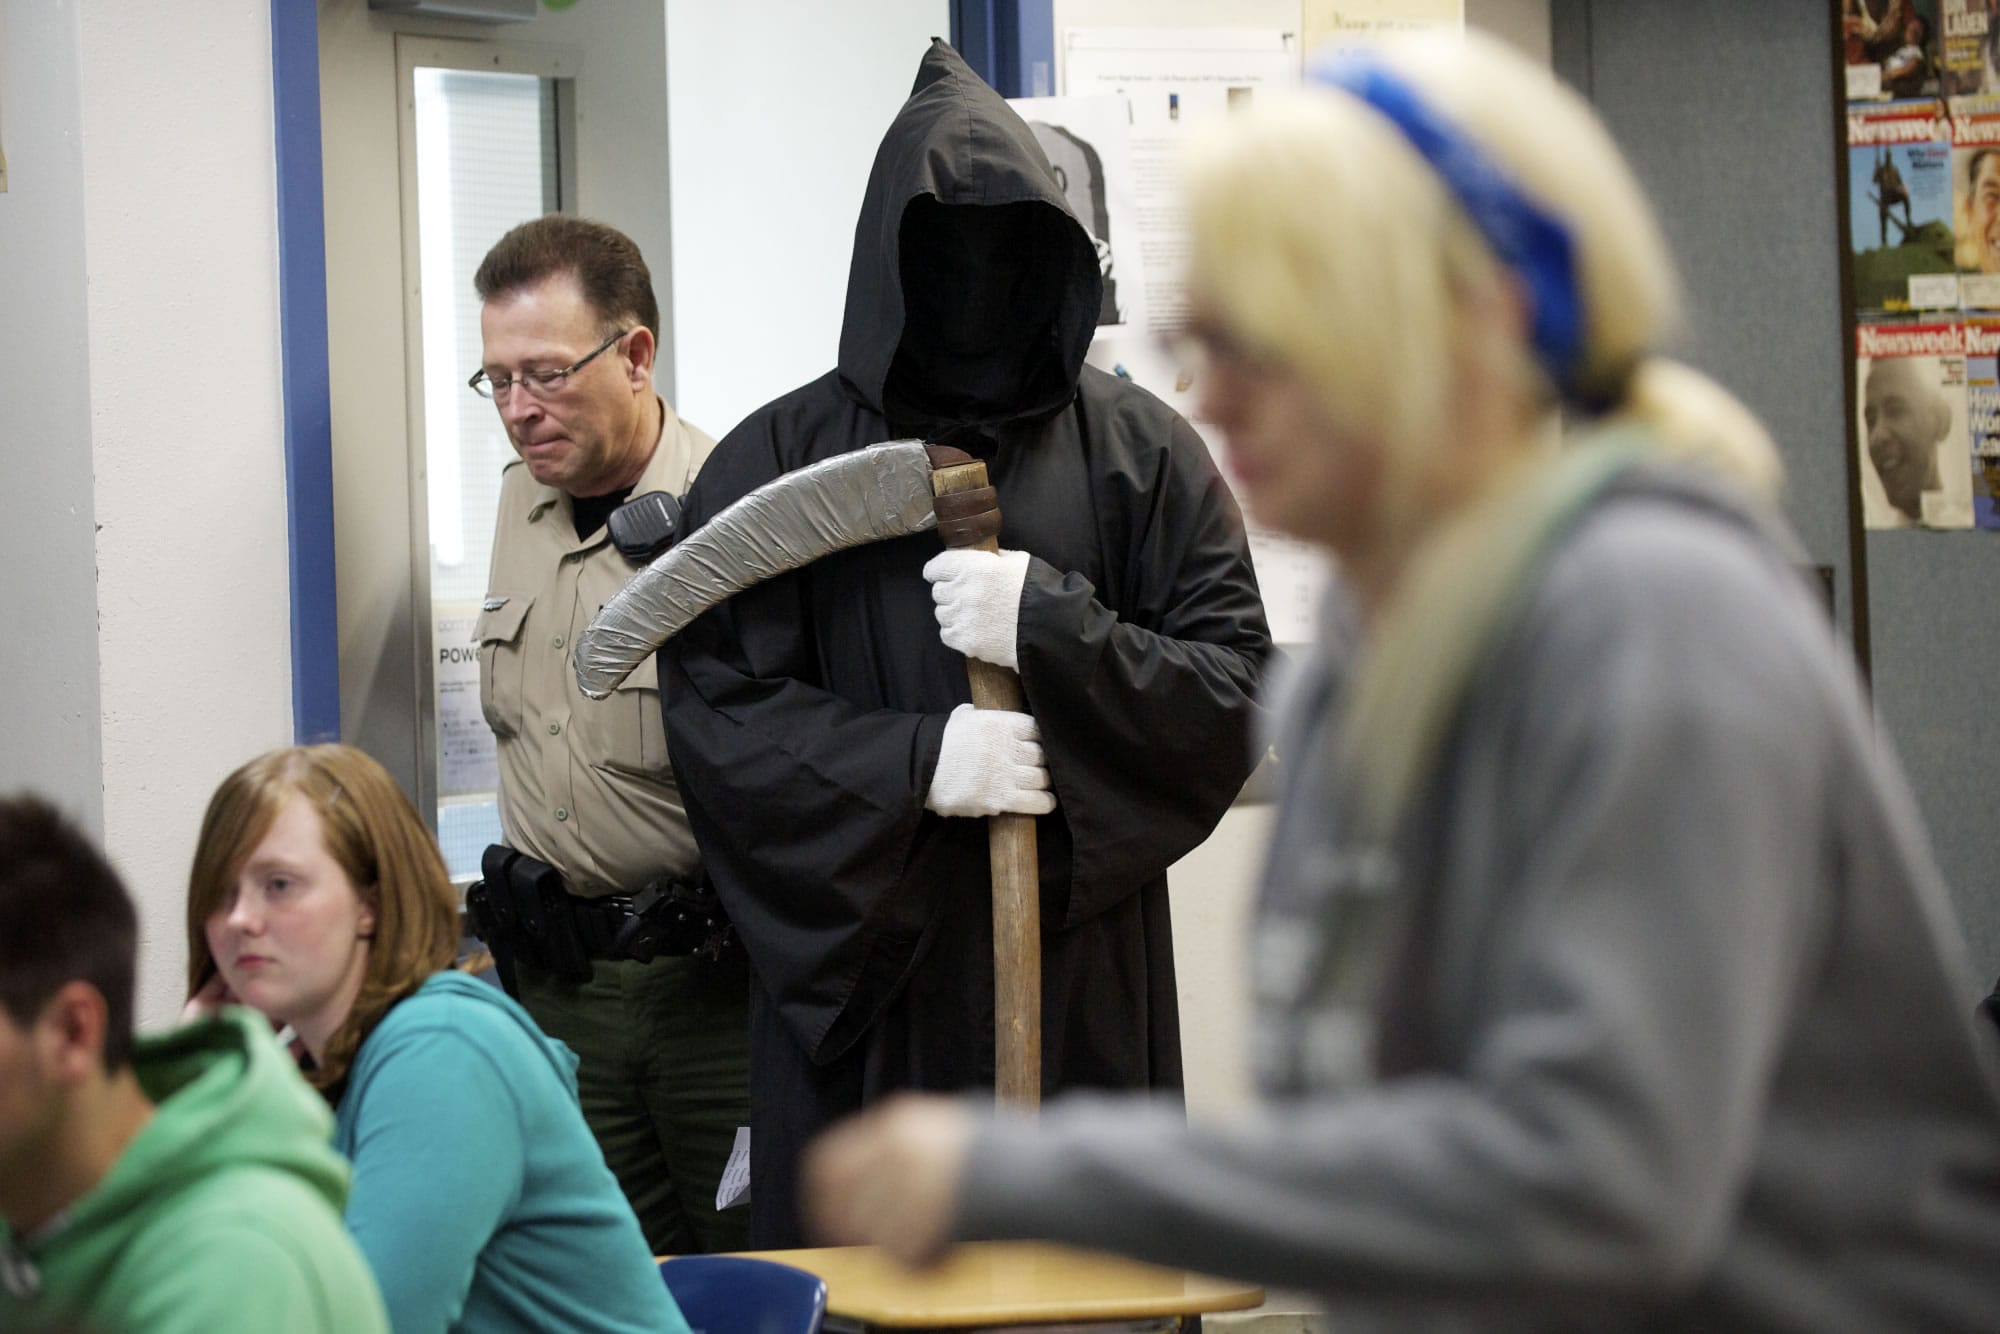 Photos by Steven Lane/The Columbian
The Grim Reaper, played by senior Josh Inman, 18, and Deputy Dwaine Bowden summon Prairie High School junior Justice Wagner, 17, right, from class, as she has just been &quot;killed&quot; in an alcohol-related crash.